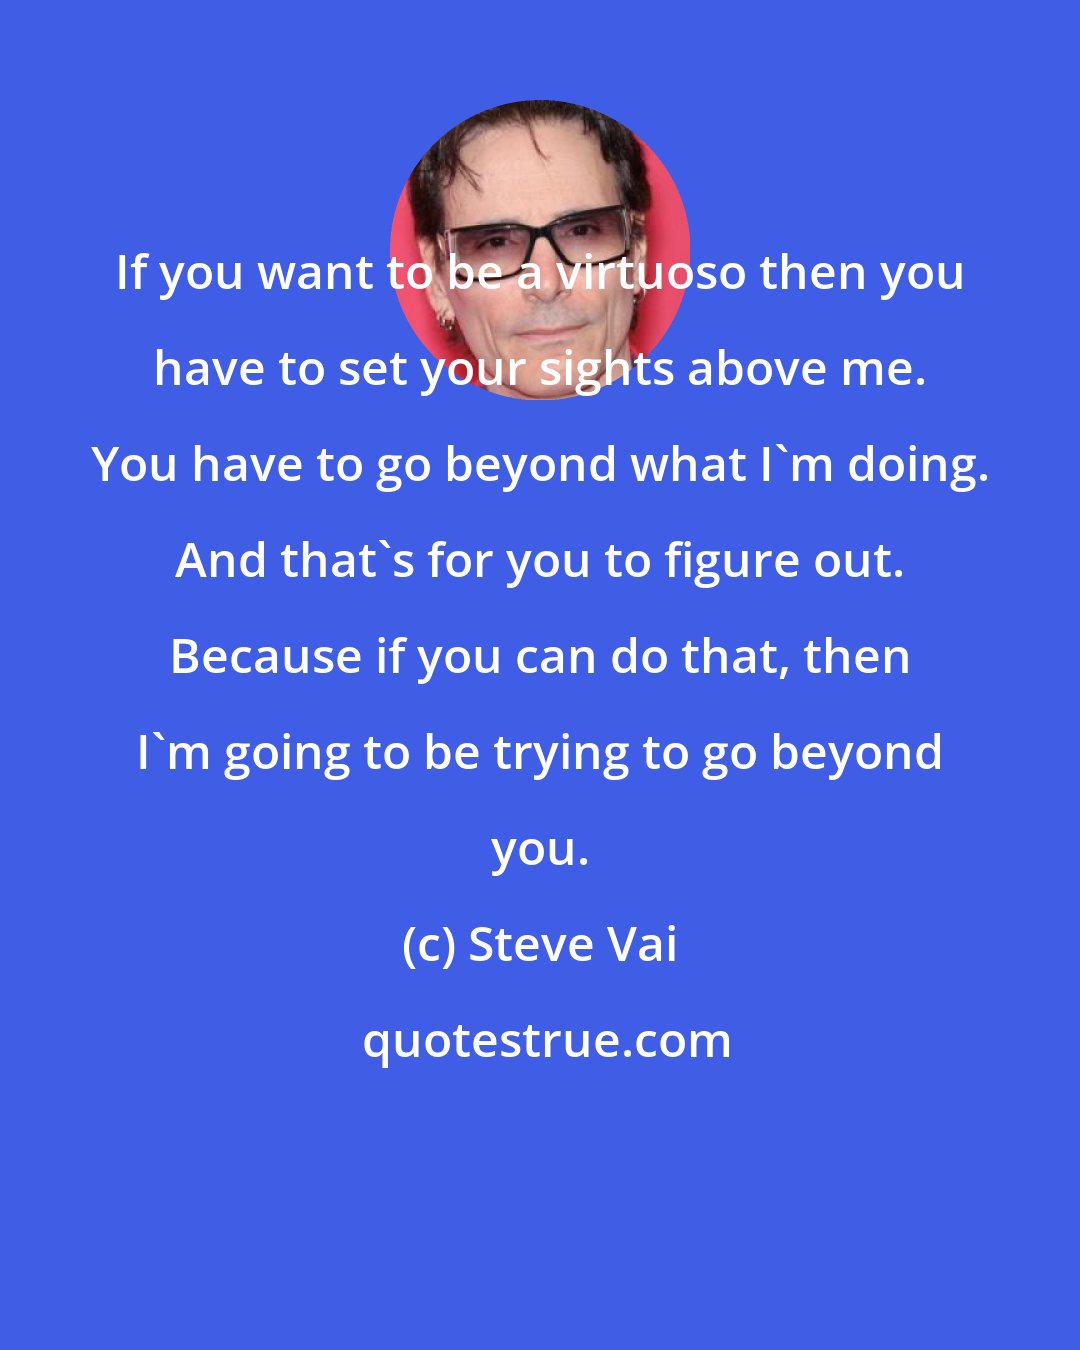 Steve Vai: If you want to be a virtuoso then you have to set your sights above me. You have to go beyond what I'm doing. And that's for you to figure out. Because if you can do that, then I'm going to be trying to go beyond you.